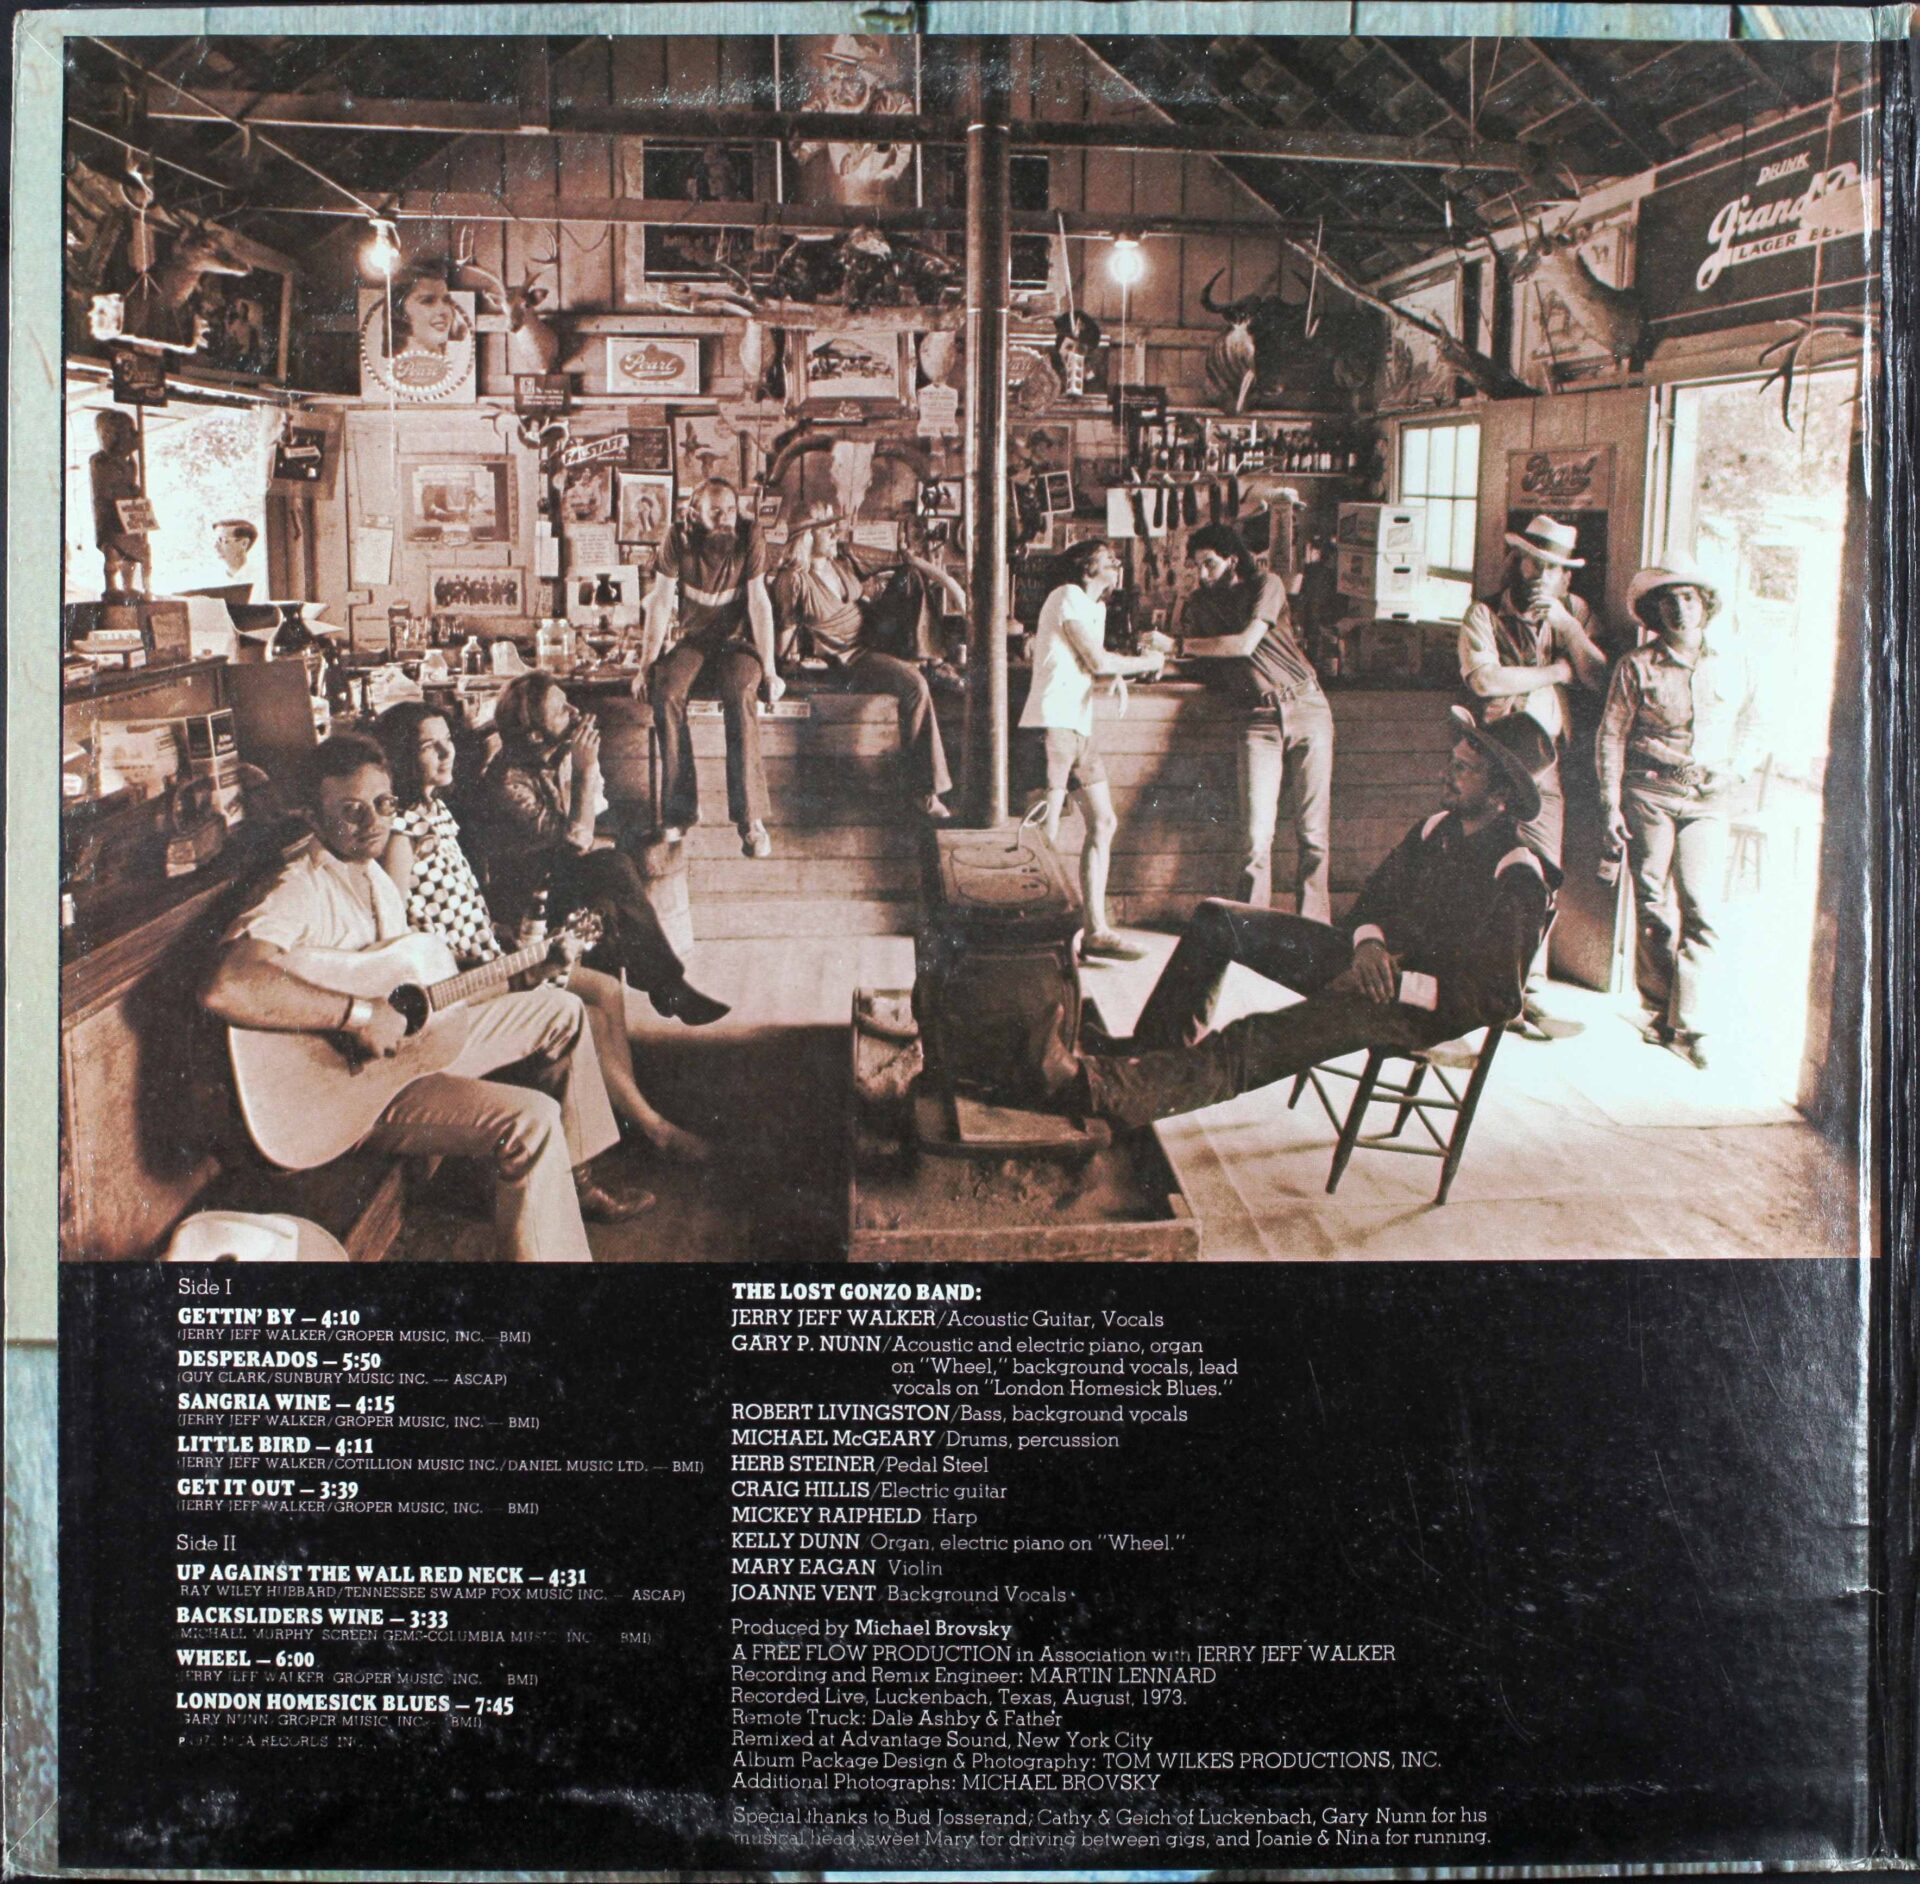 Half the gatefold of ¡Viva Terlingua! Gary P. Nunn seated far left with guitar; Jerry Jeff on the right, kicked back in Luckenbach, Texas.